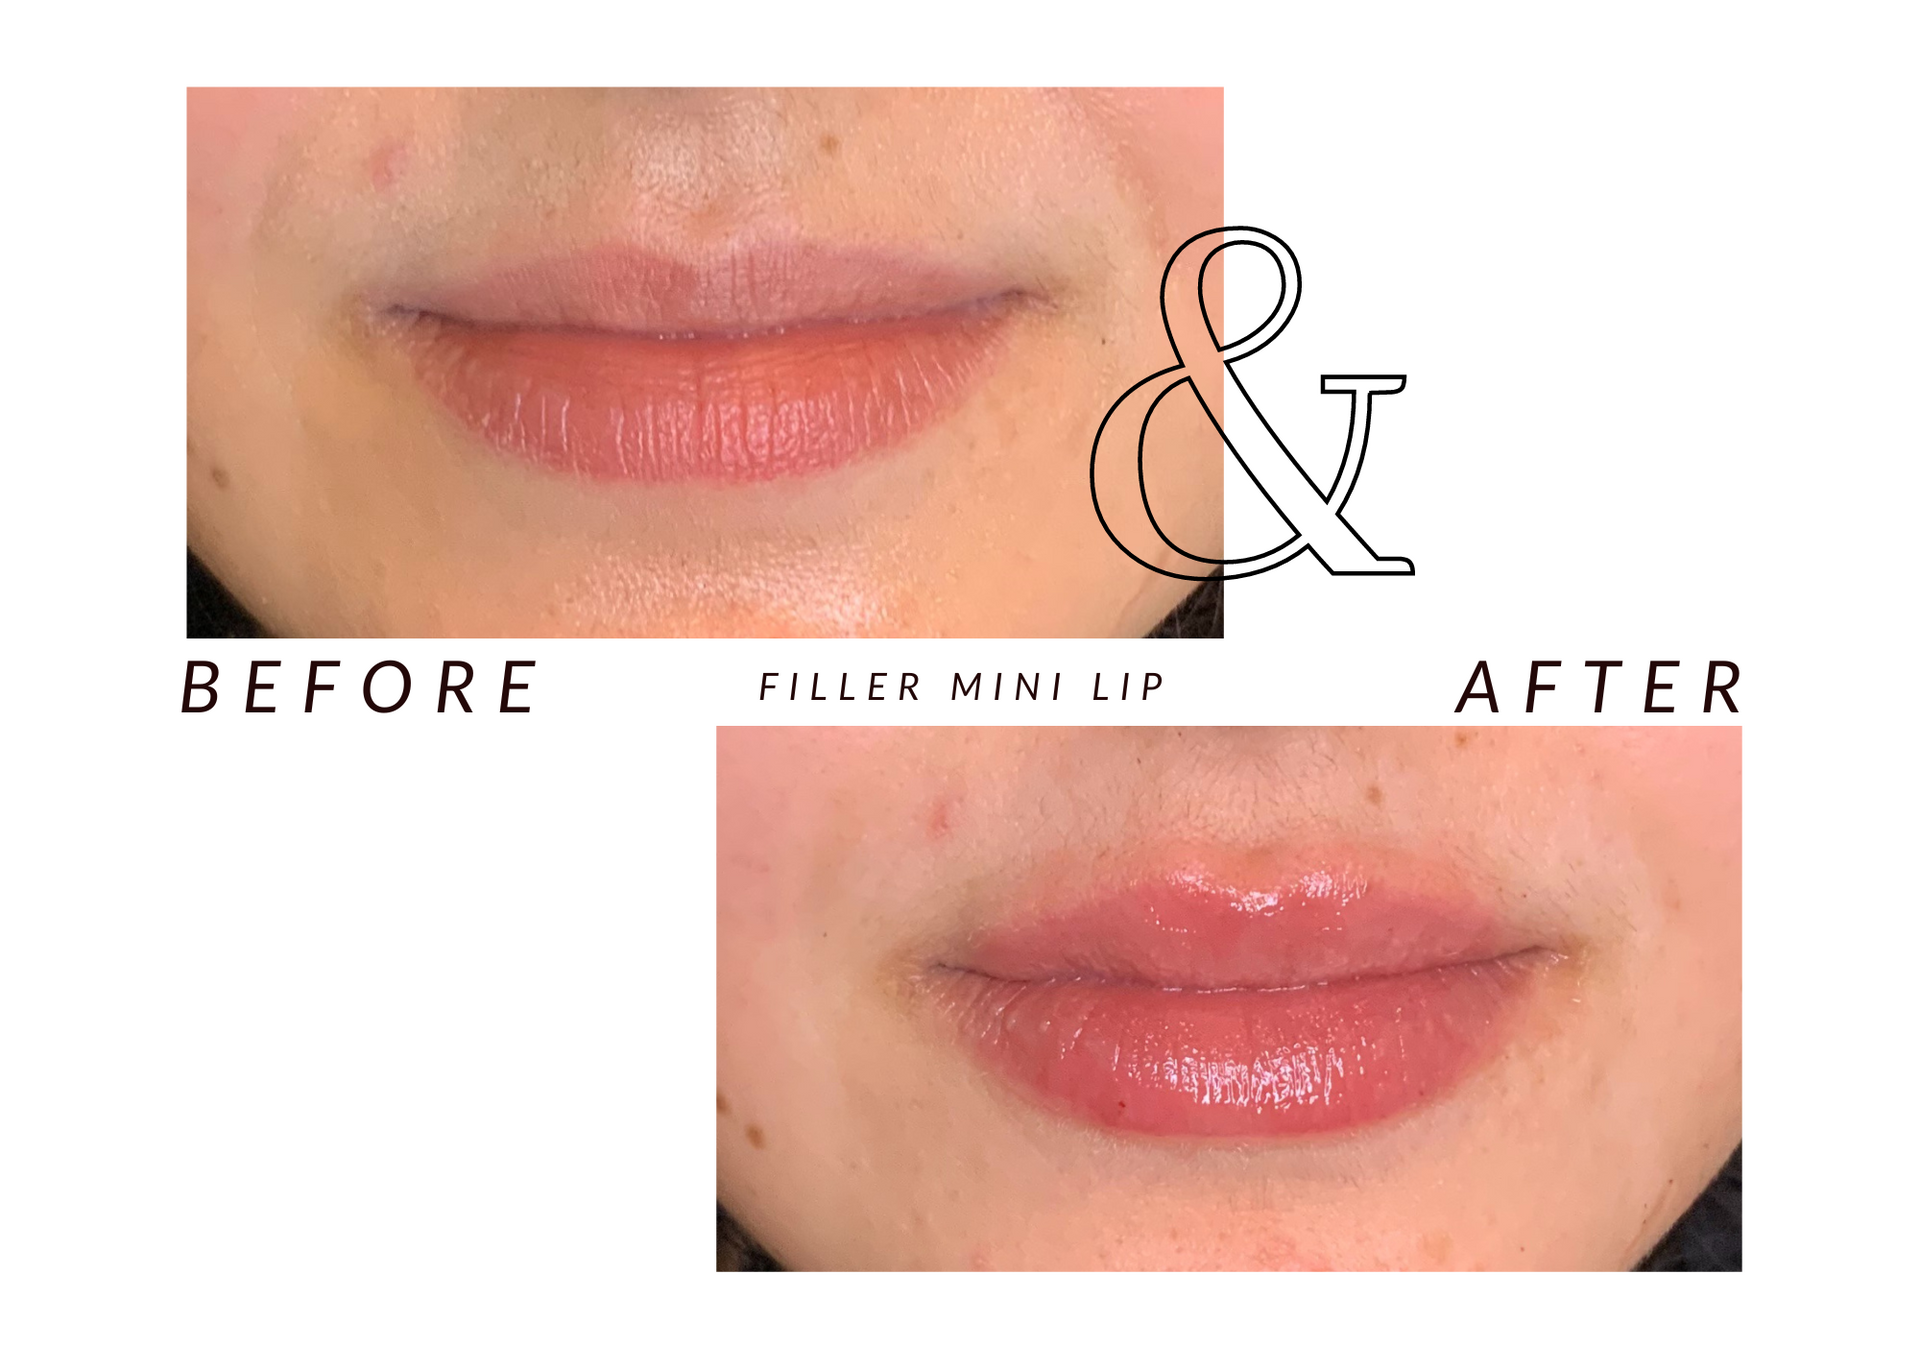 A picture of a woman 's lips before and after filler full lip enlargement